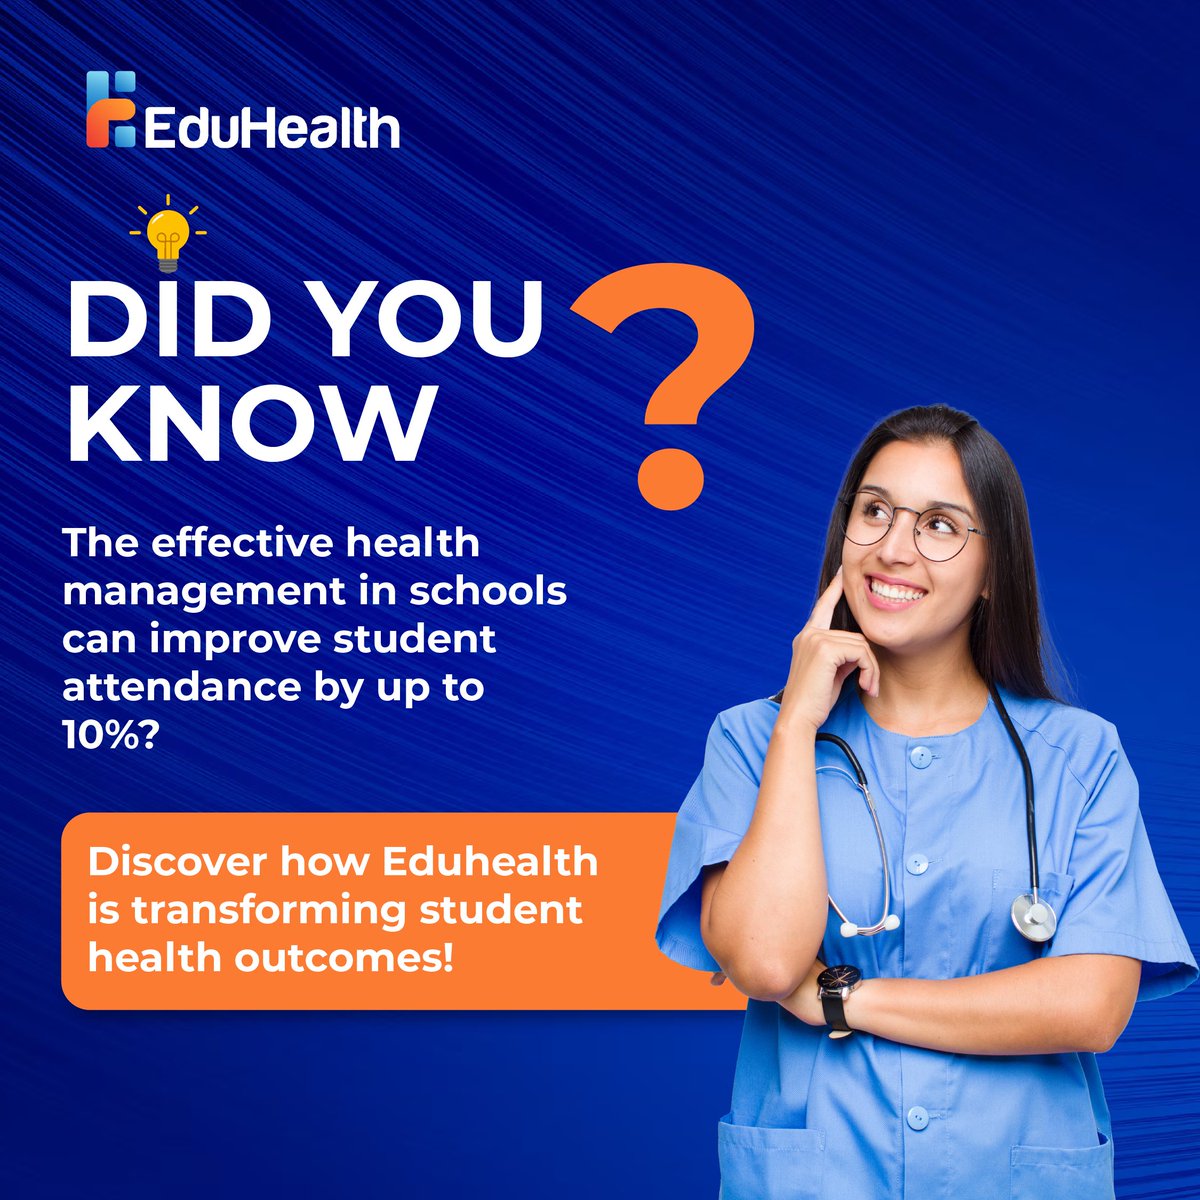 Unlocking the potential of student attendance through effective health management!
Explore how #Eduhealth is reshaping student well-being & academic success.
Read more: Best School Nurse Software (eduhealthsystem.com)
#StudentHealth #WellnessWins #HealthManagement #healthcare